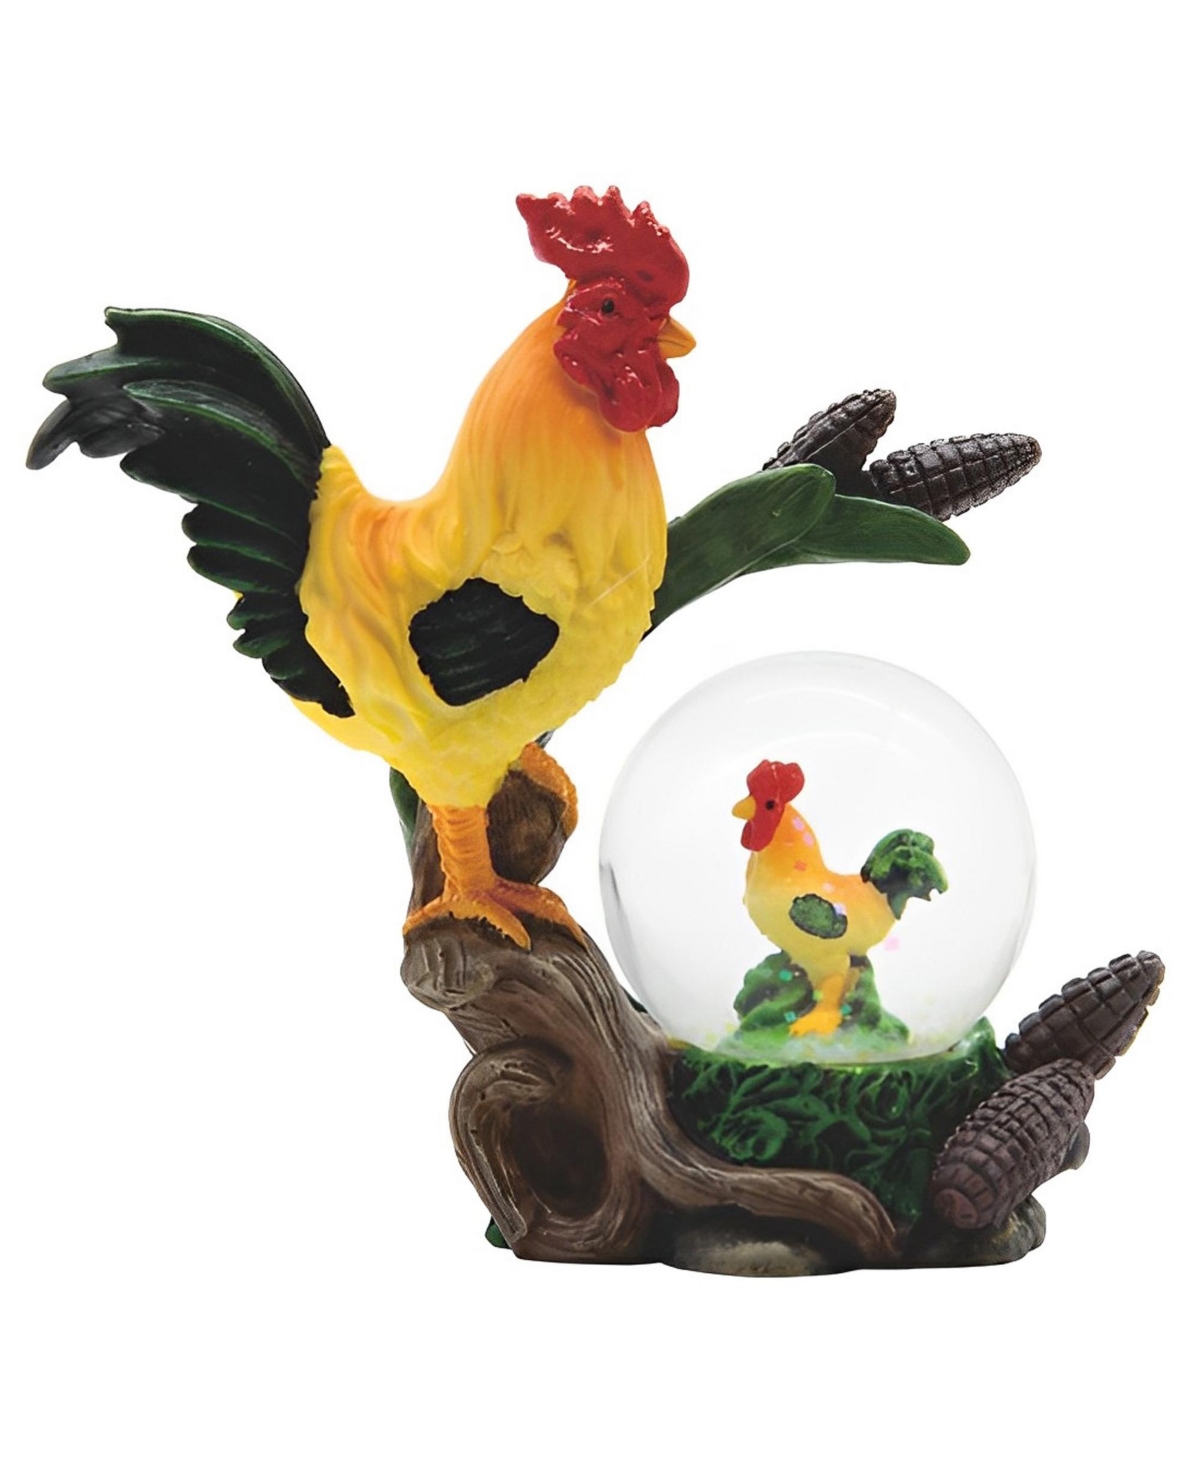 4.25"H Rooster Glitter Snow Globe Figurine Home Decor Perfect Gift for House Warming, Holidays and Birthdays - Multicolor